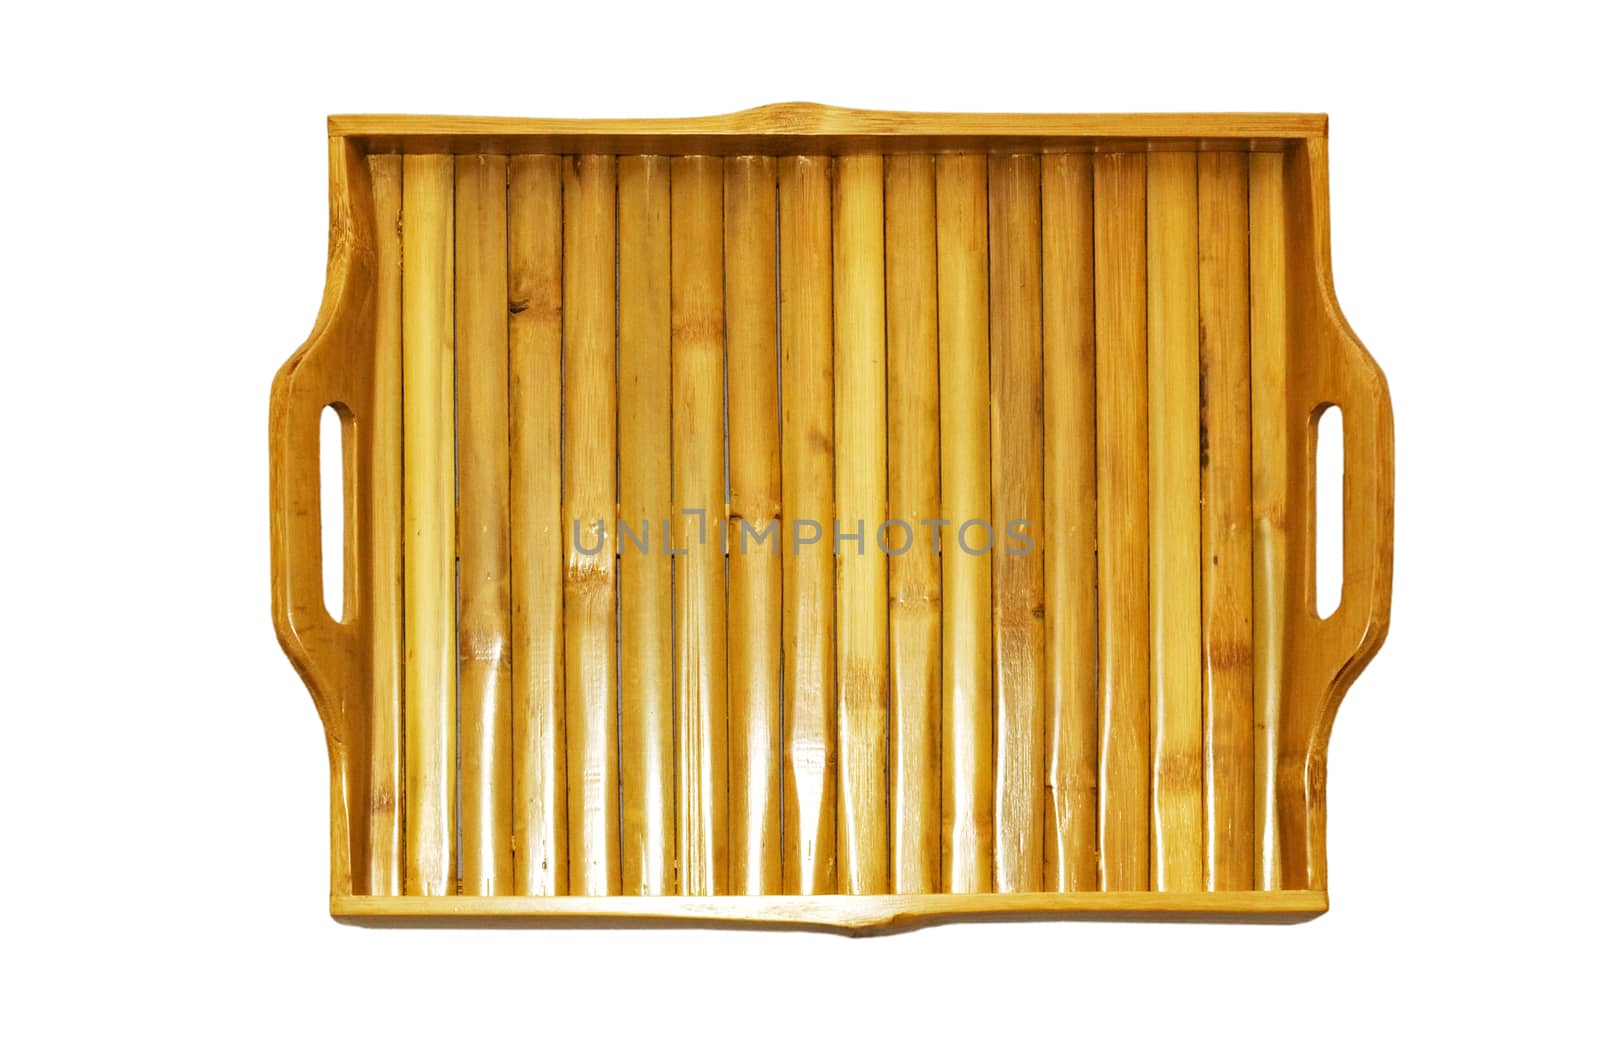 Bamboo tray by NuwatPhoto